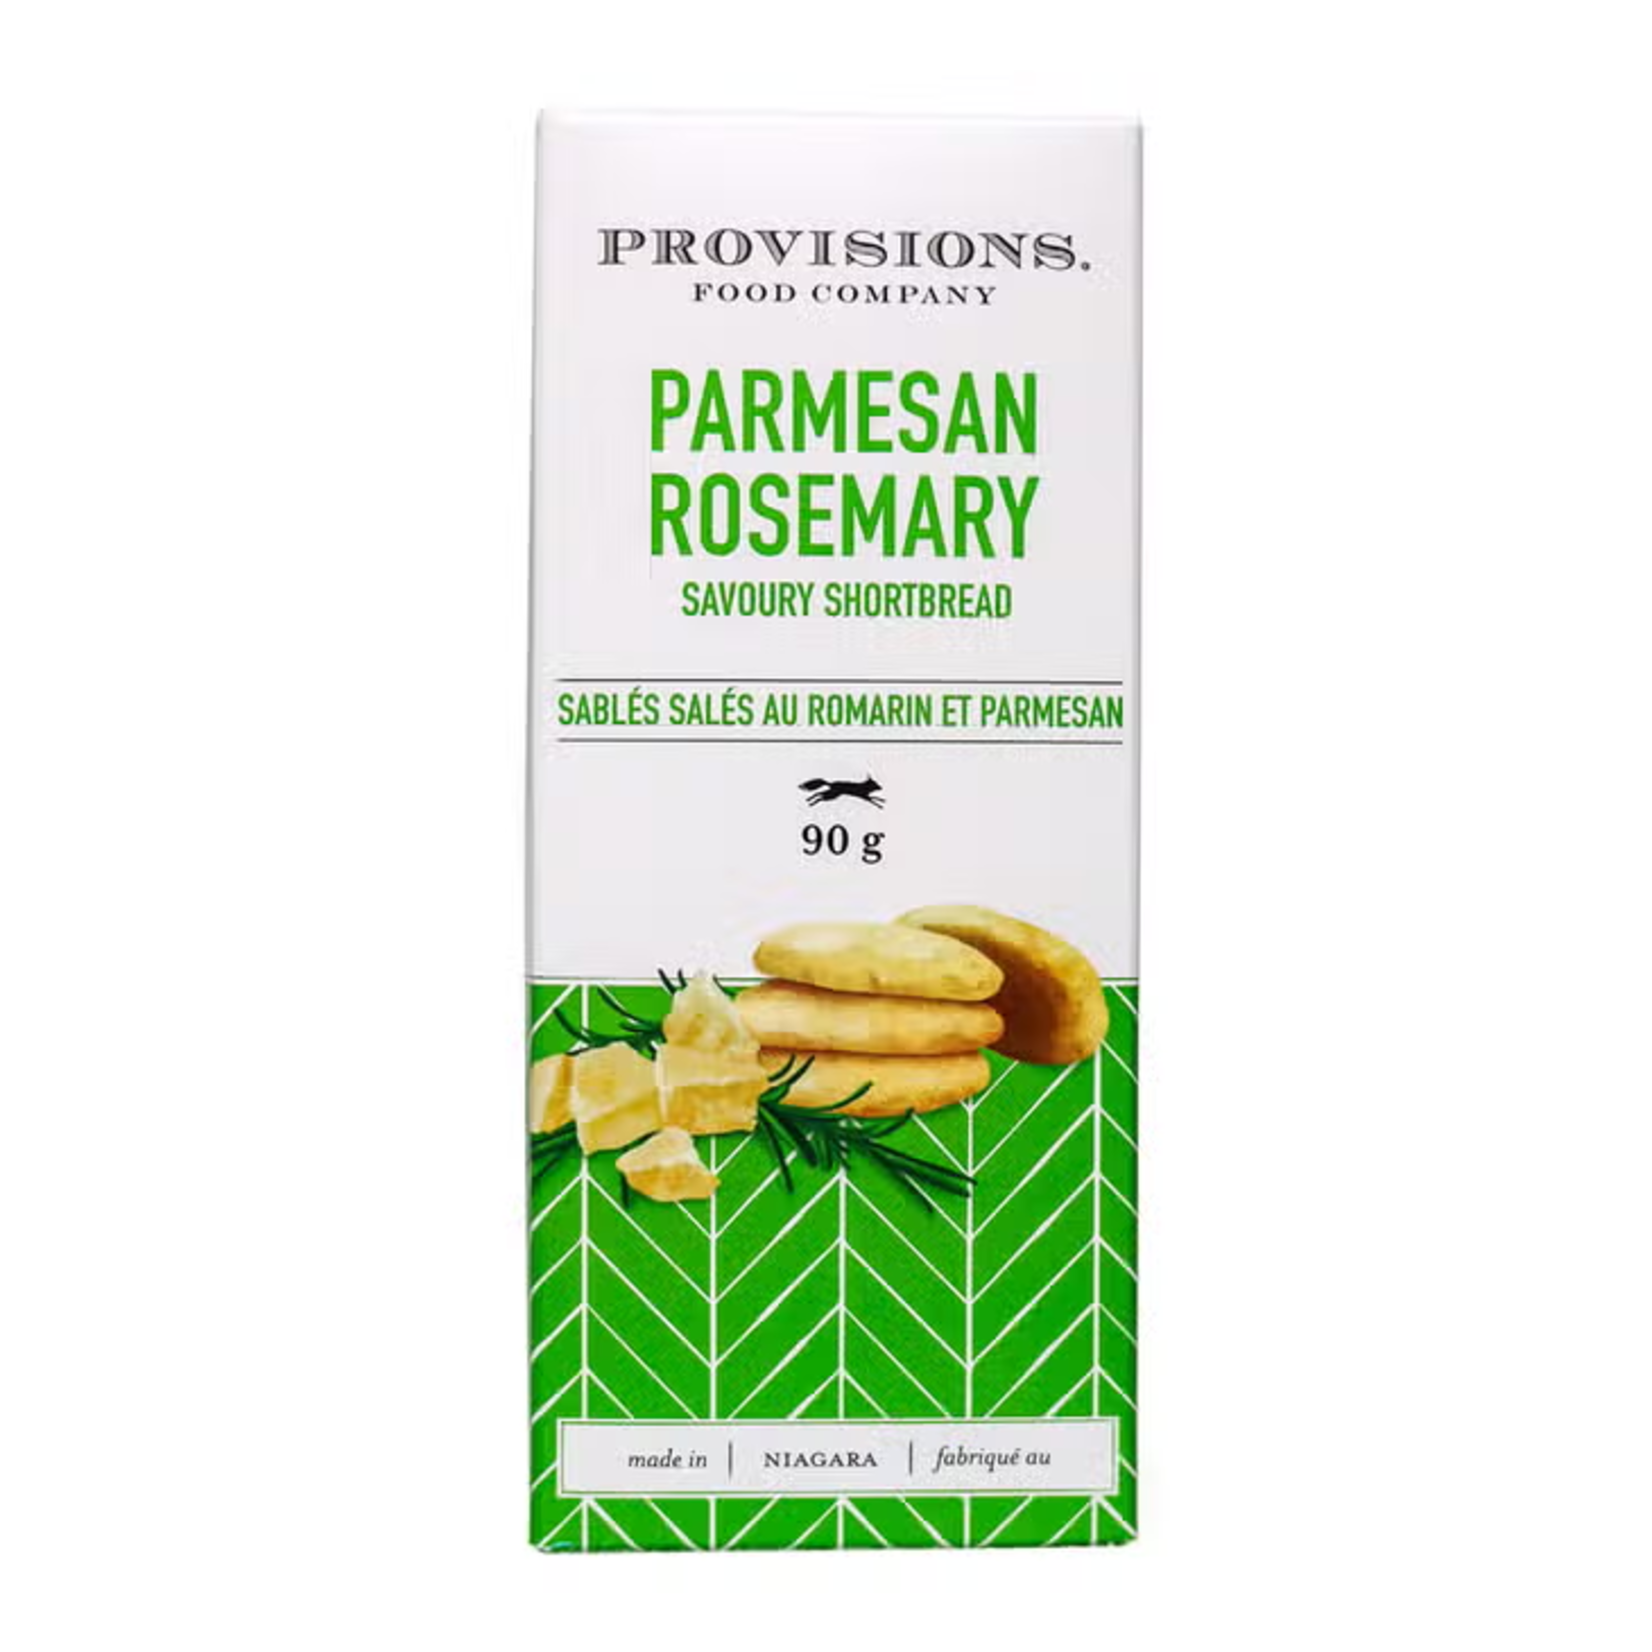 Provisions Food Company Parmesan & Rosemary Shortbreads